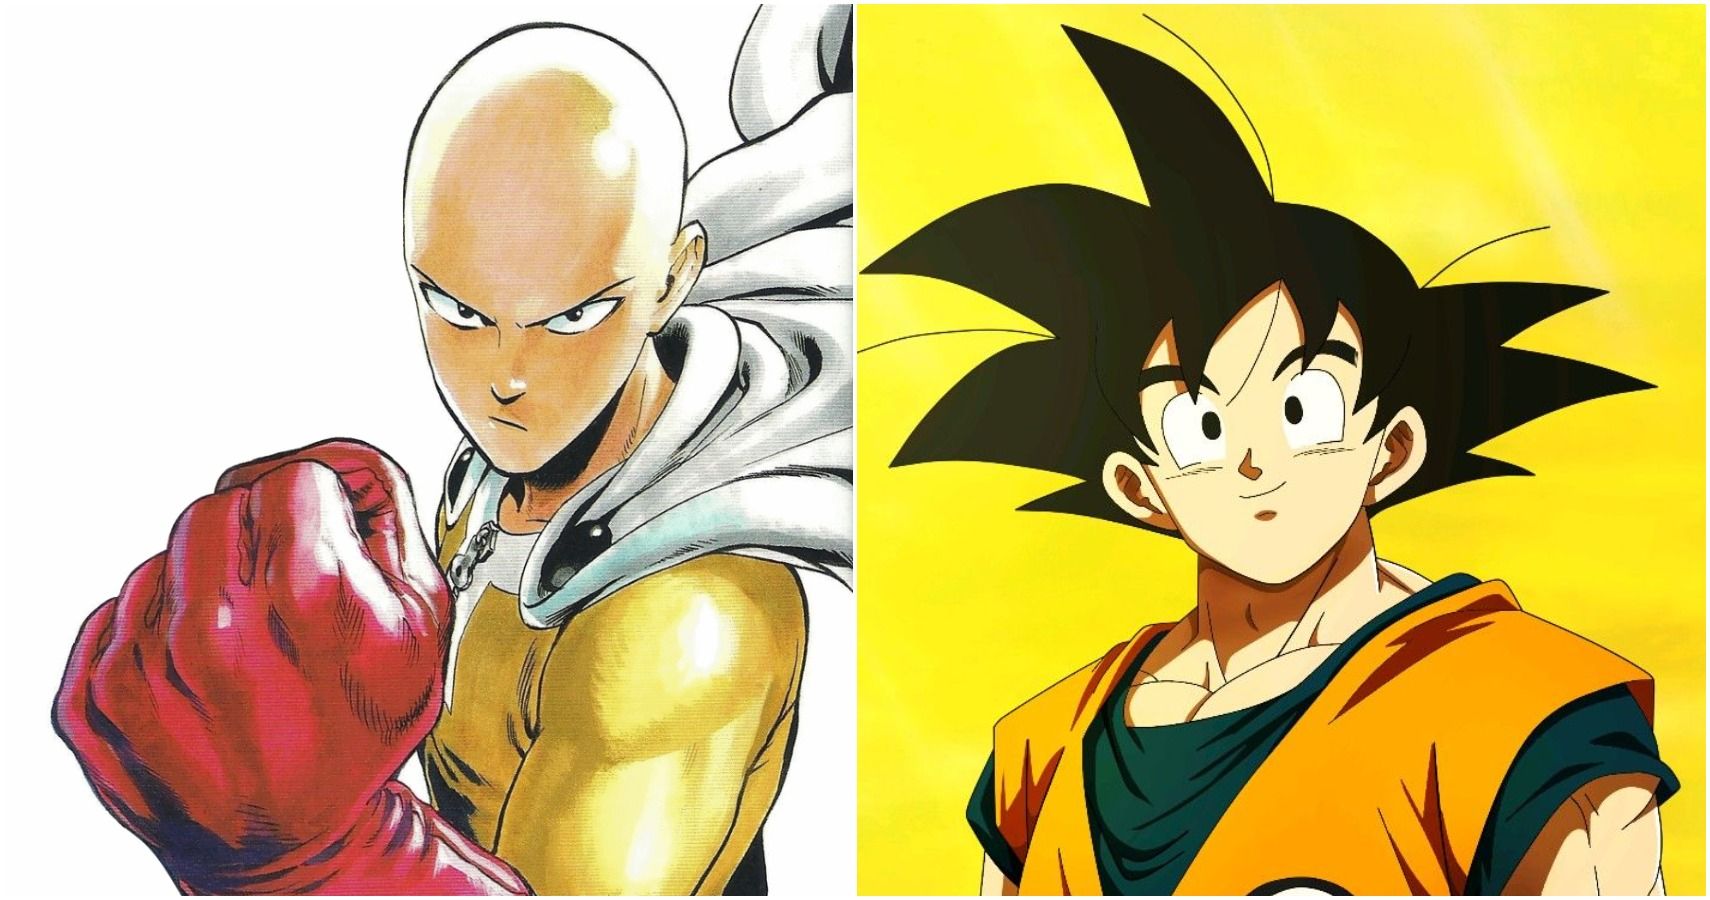 Is Saitama Stronger Than Goku? 7 Reasons Each Character Would Win If They Ever Fought